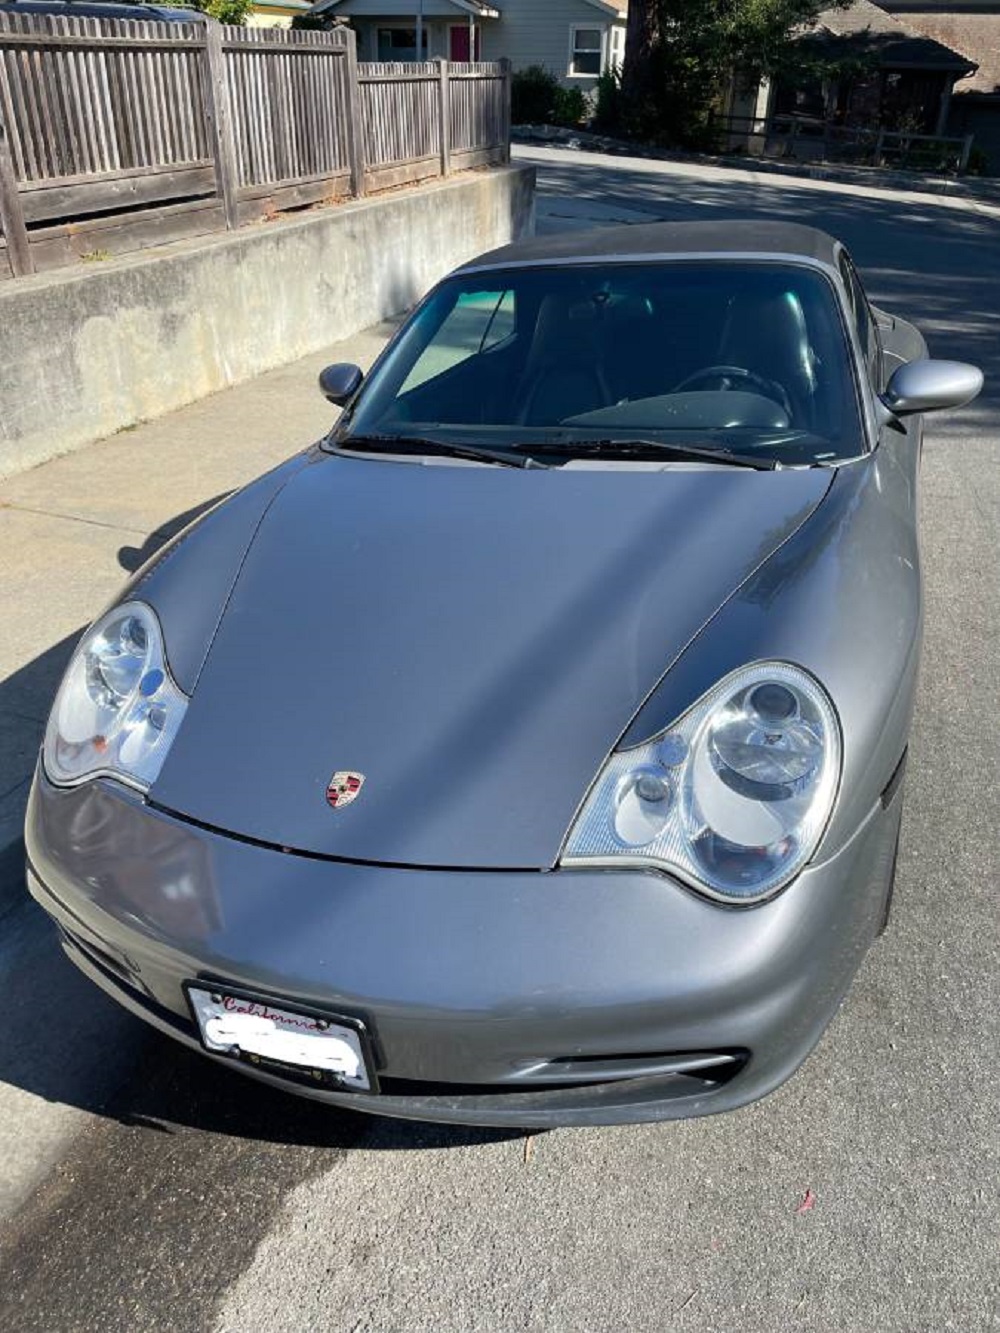 photo of Is this 2003 911 Carrera 4 Cabriolet a Good Buy at $23,500? image